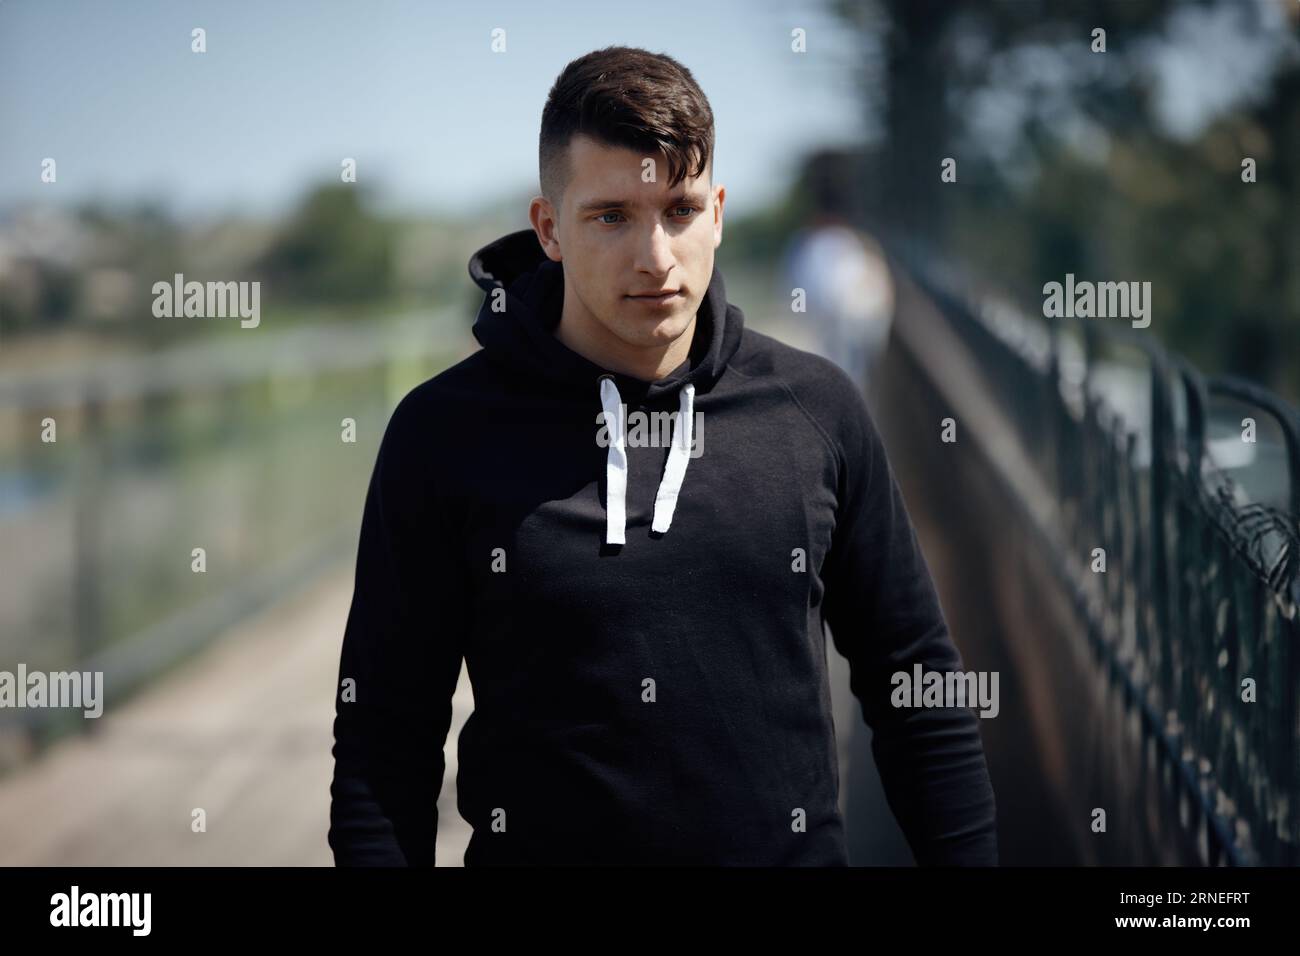 Young Man with black sweater walk outside in park in midday sun and look down to side with a neutral and serious face expression Stock Photo